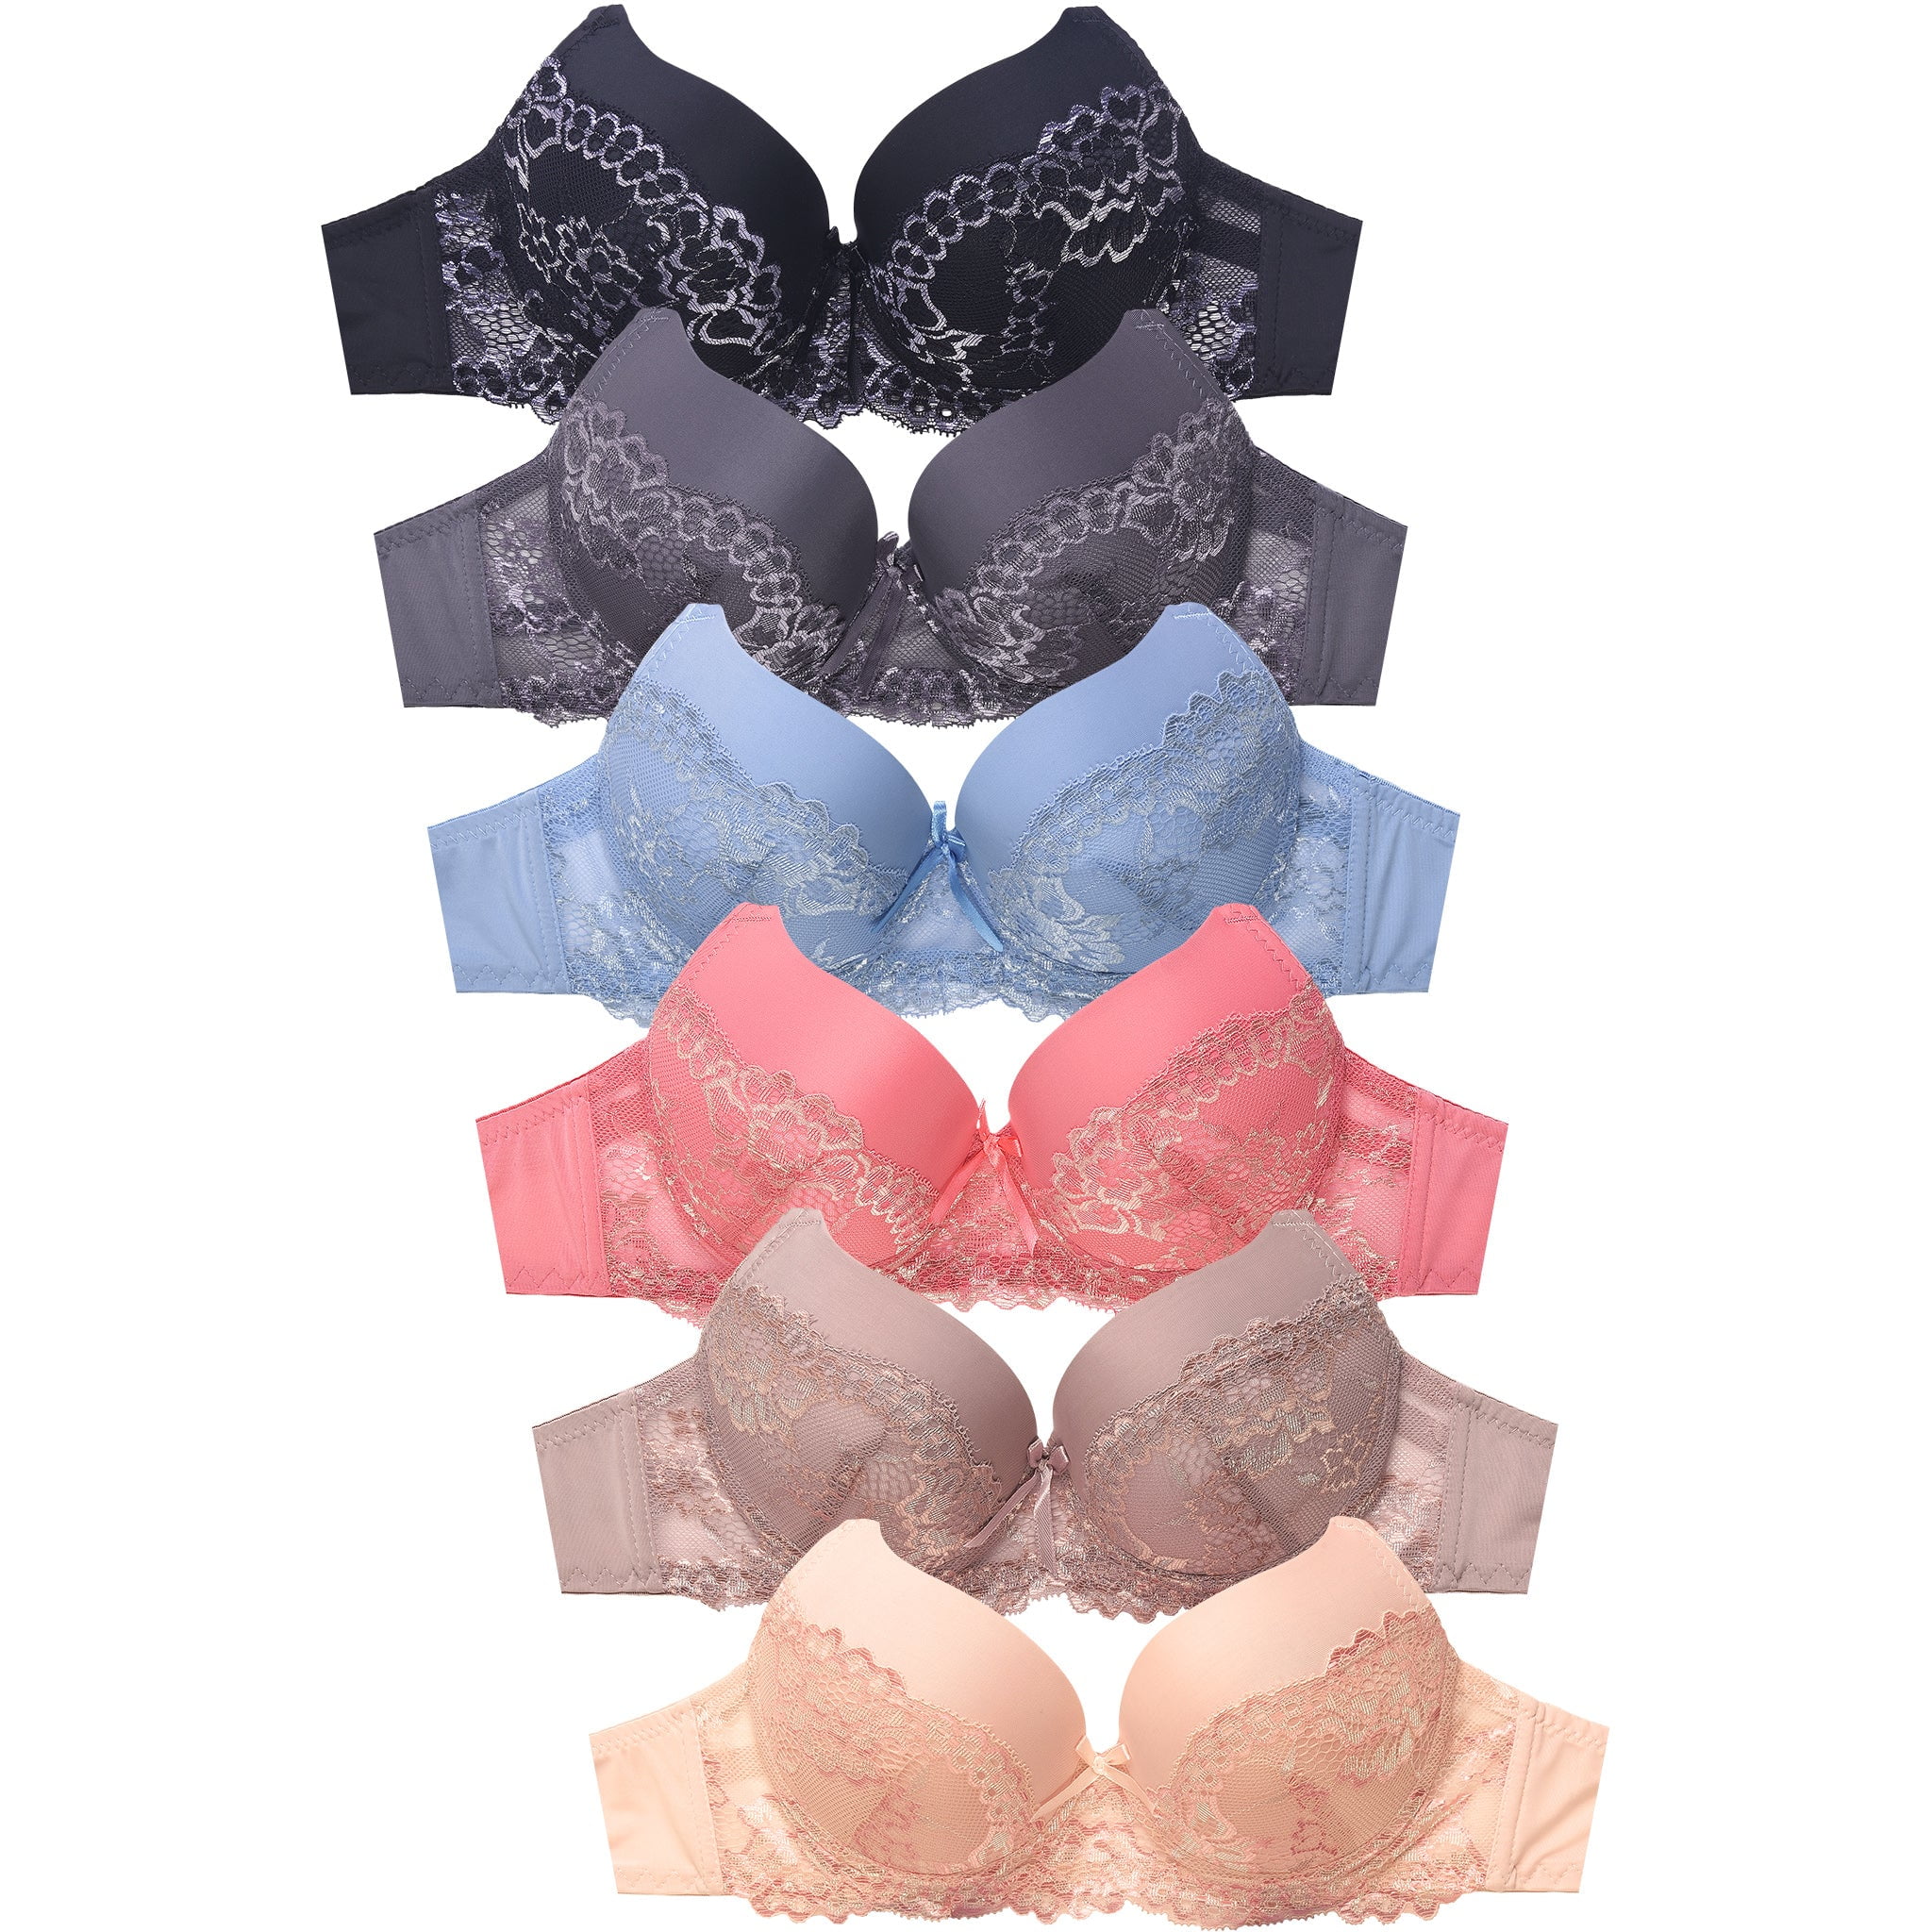 Sofra IN-BR4417PL-36B Womens BR4417PL Solid Lace Accent Bra Intimate  Set, Assorted Color - Size 36B, Pack of 6 